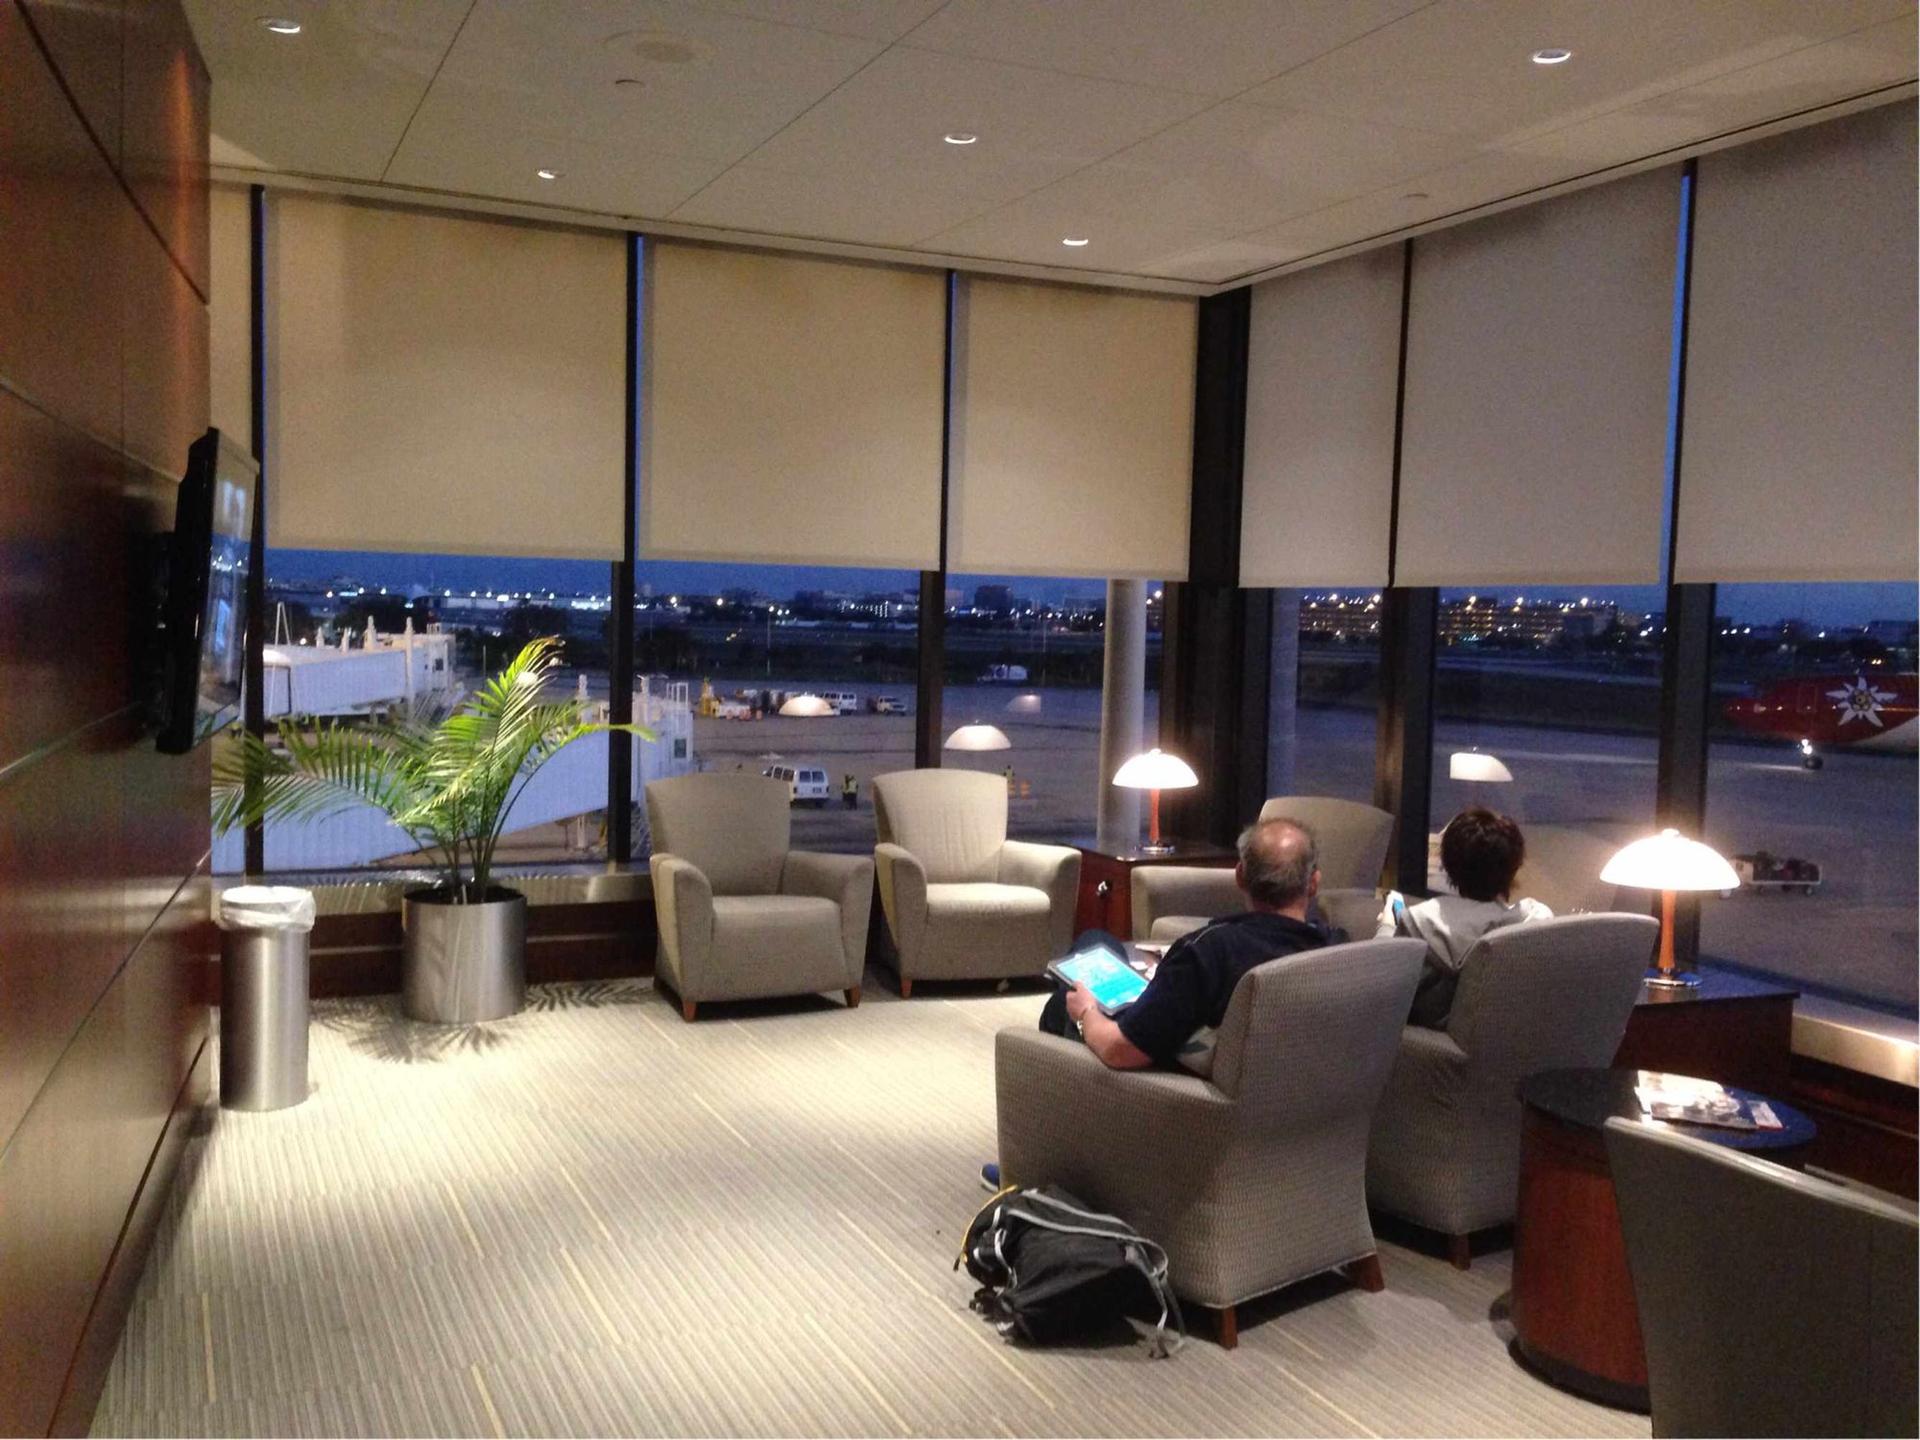 American Airlines Admirals Club image 5 of 20